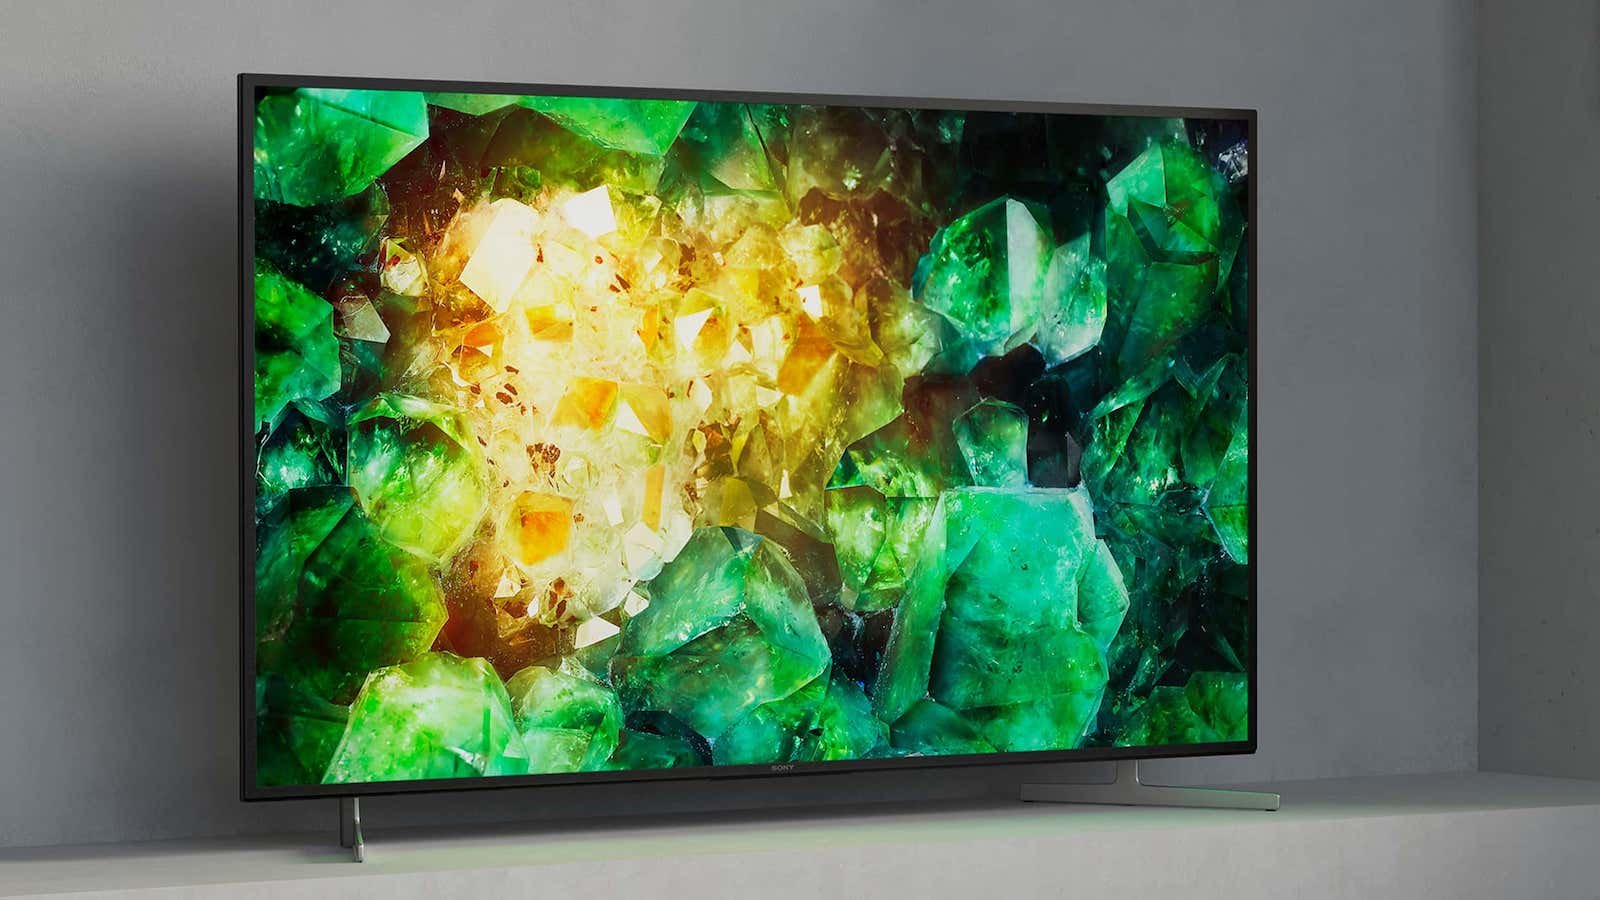 Sony XH81 4K TV series comes in four sizes with different lighting options